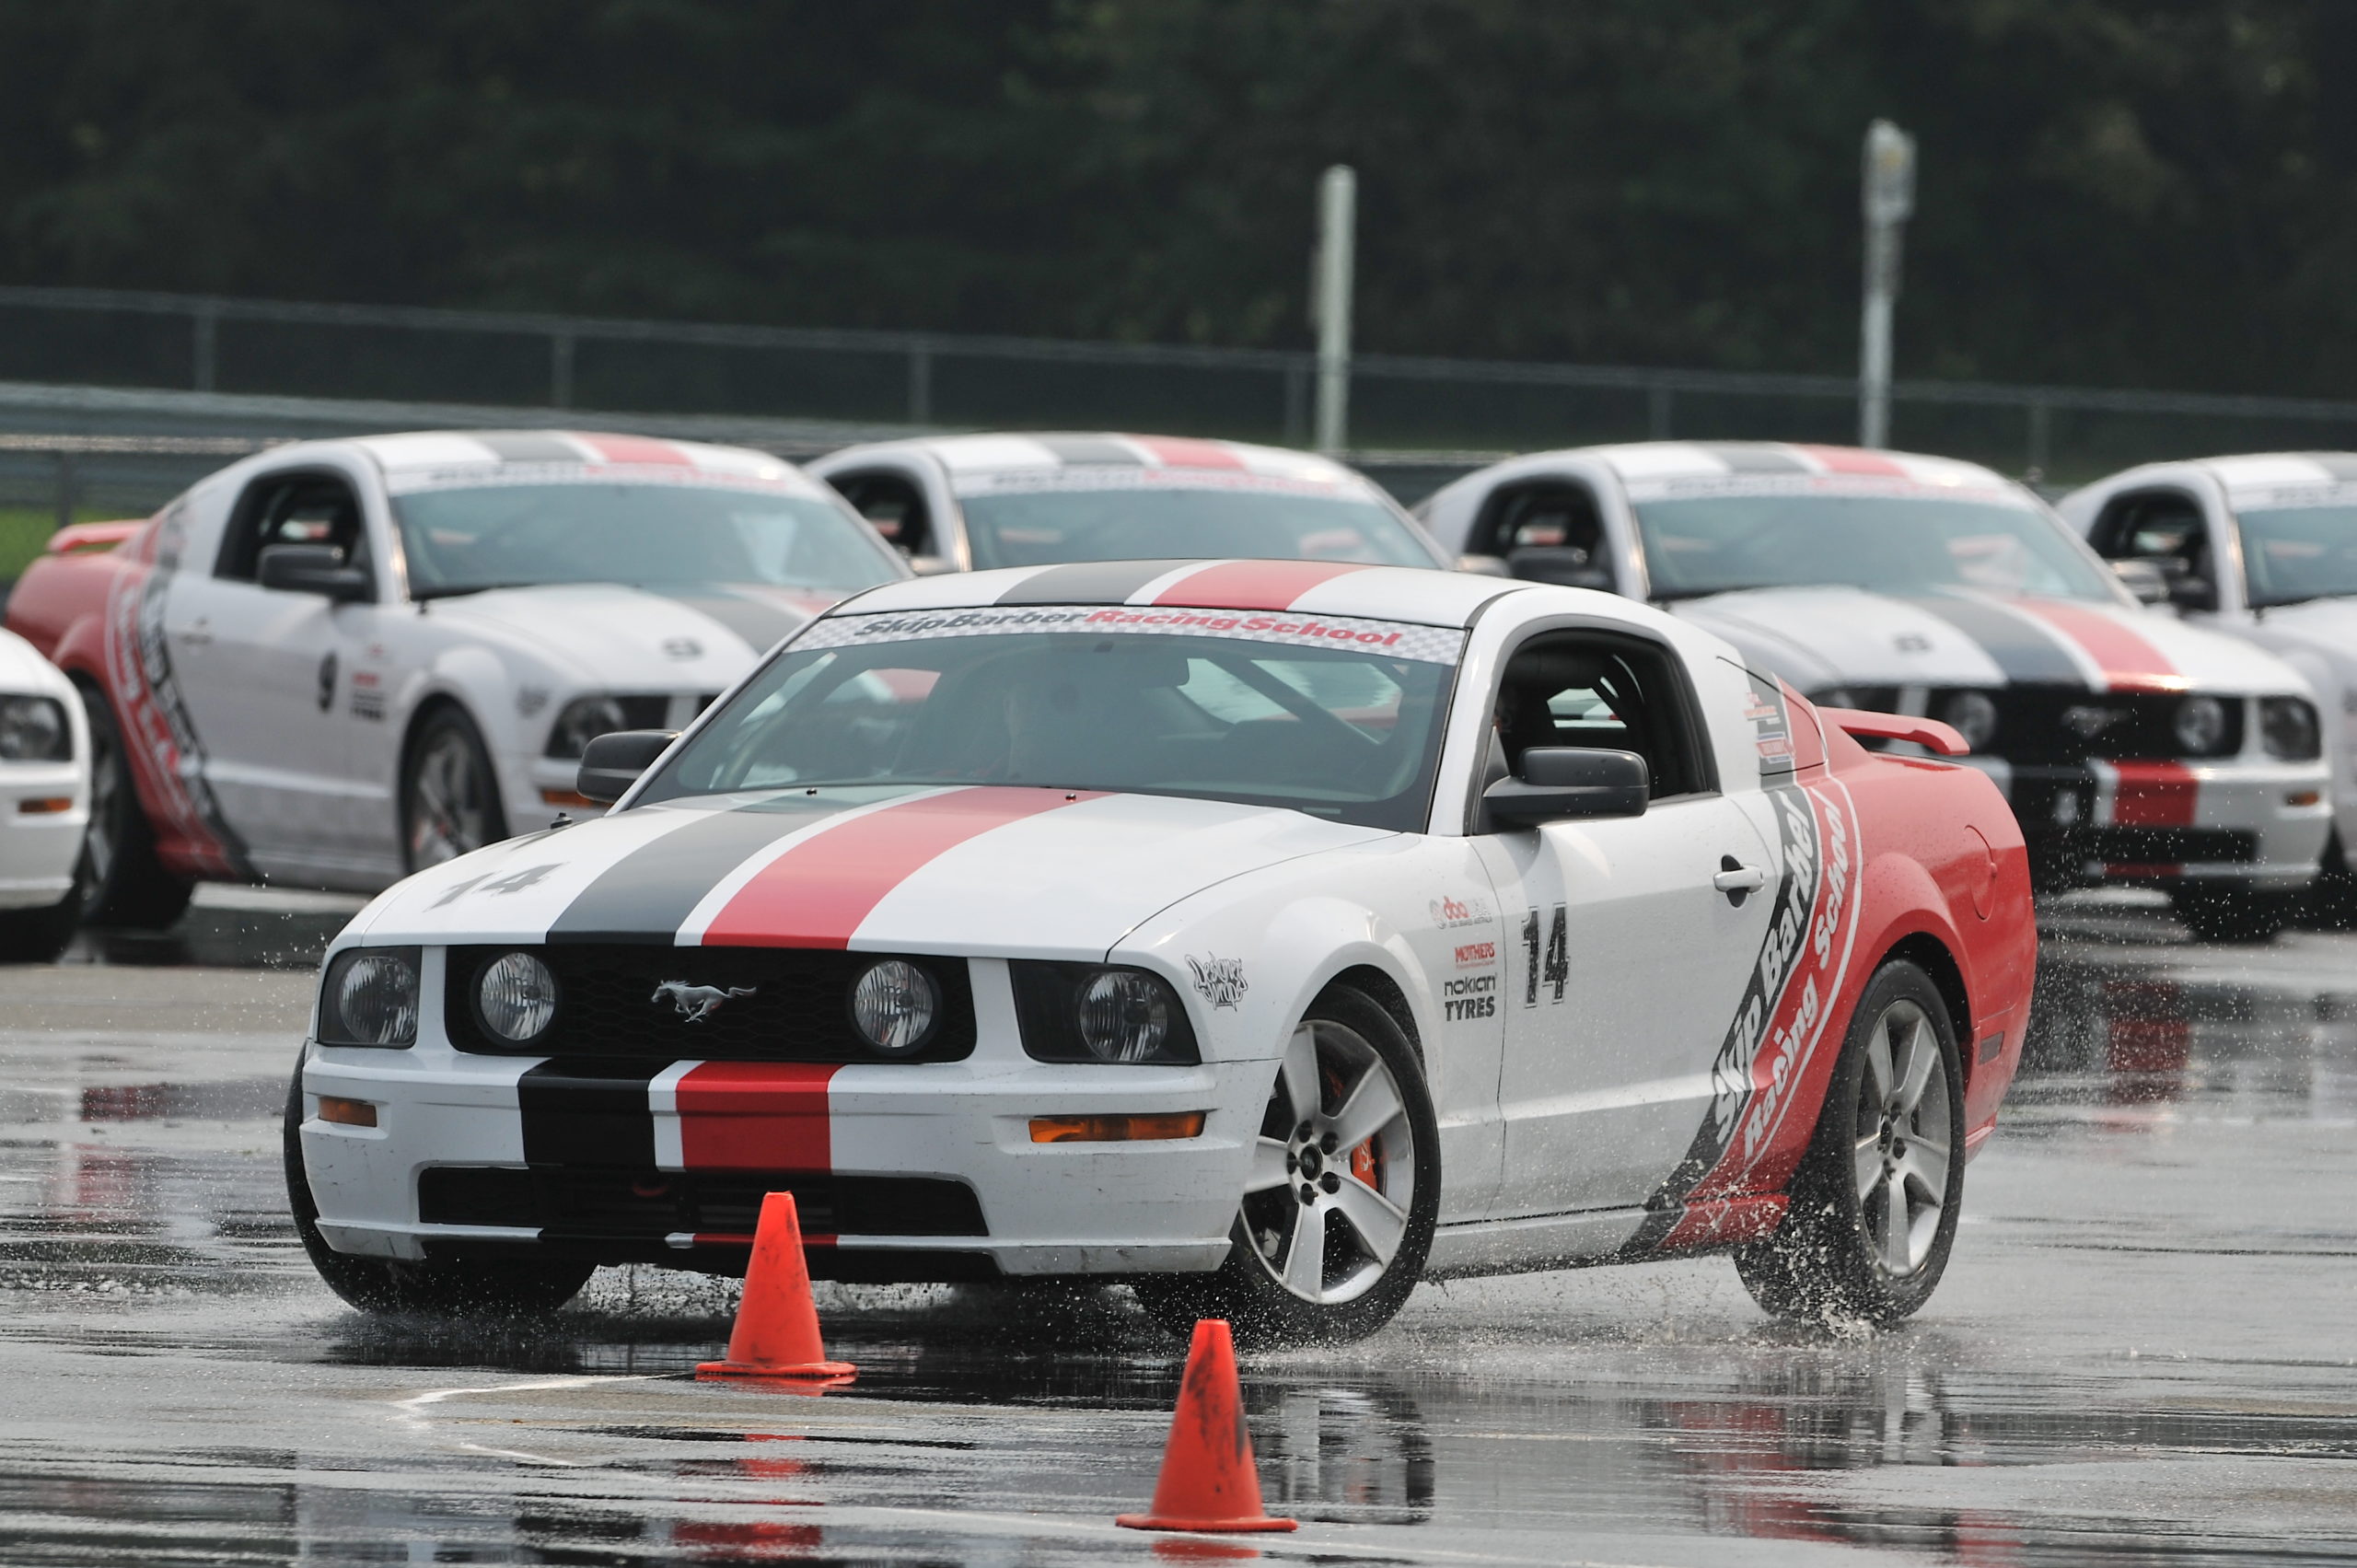 Autocross in action at the Skip Barber Racing School